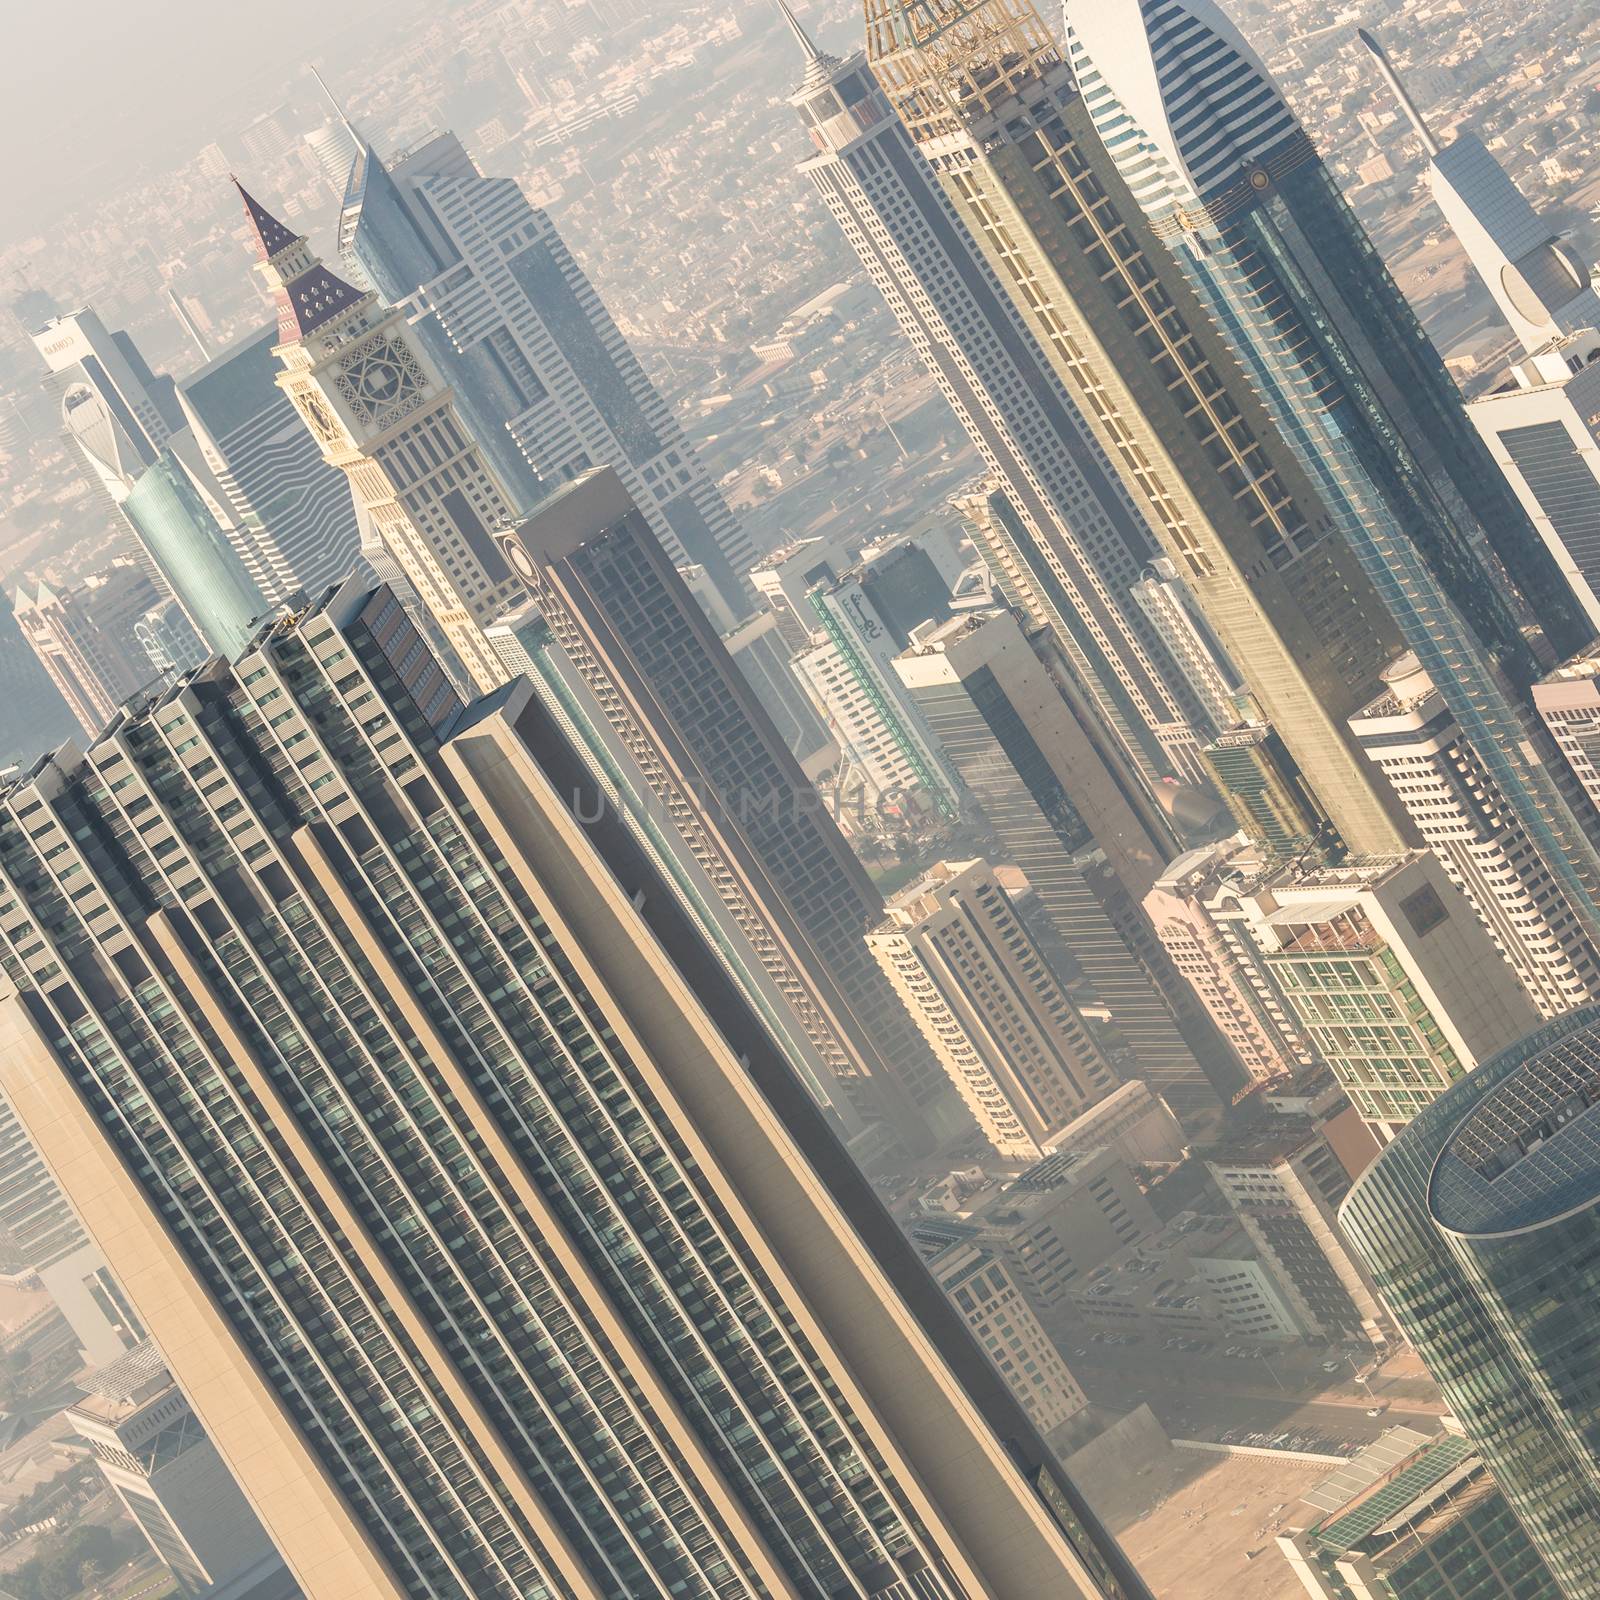 Aerial view of Dubai downtown skyscrapers. Sheikh Zayed Road skyscrapers. Dubai Metro station Financial center.